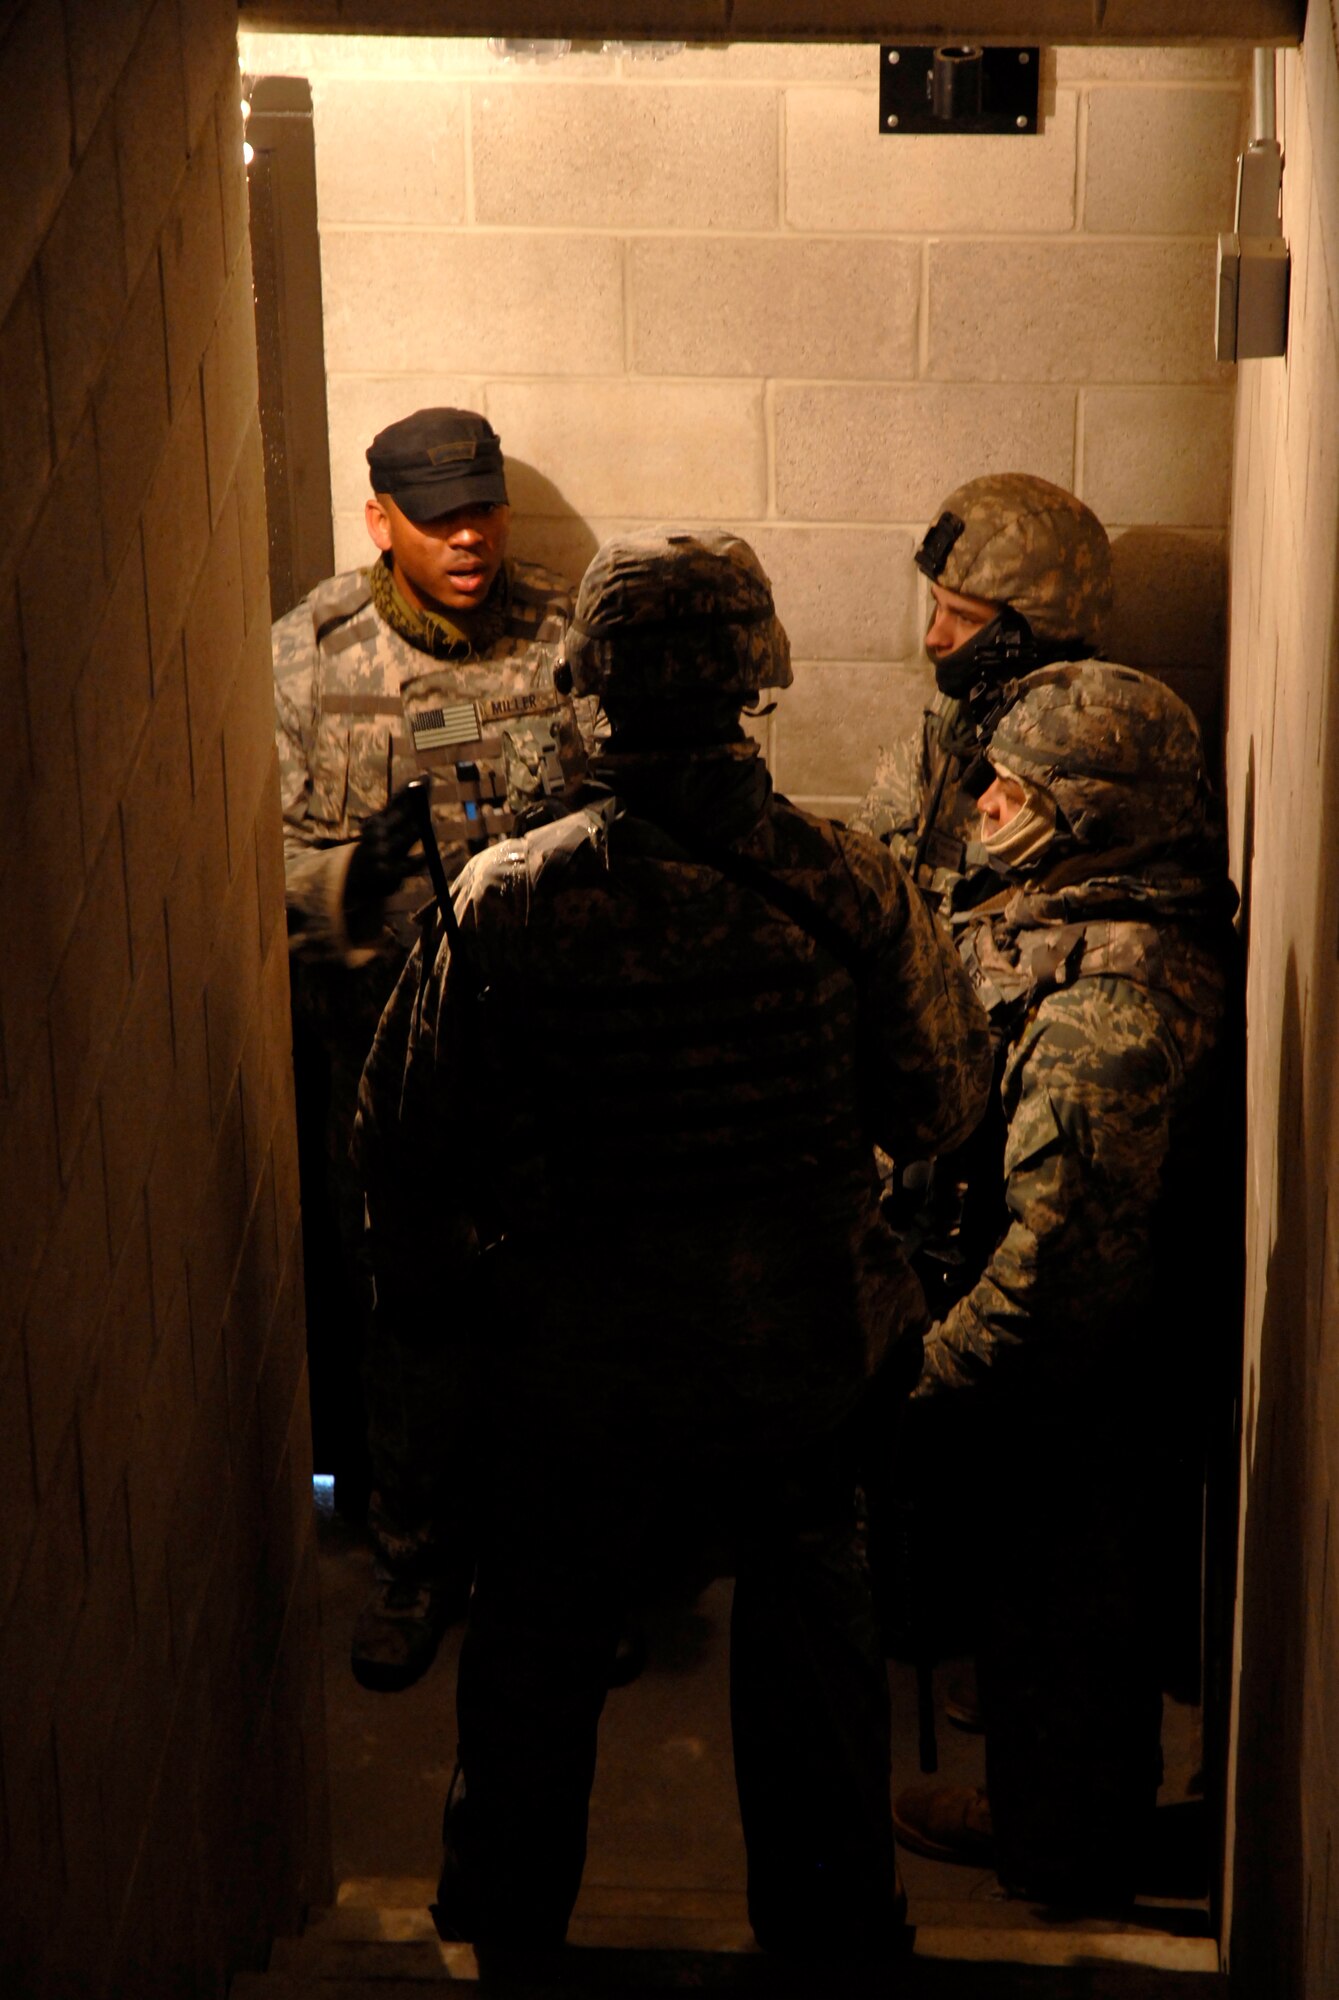 Staff Sgt. Charles Miller from the 421st Combat Training Squadron at the U.S. Air Force Expeditionary Center, teaches deploying security forces Airmen how to clear stairwells during urban operations training as part of a pre-deployment training course on a range at Joint Base McGuire-Dix-Lakehurst, N.J. March 13, 2010. (U.S. Air Force Photo/Tech. Sgt. Paul R. Evans)